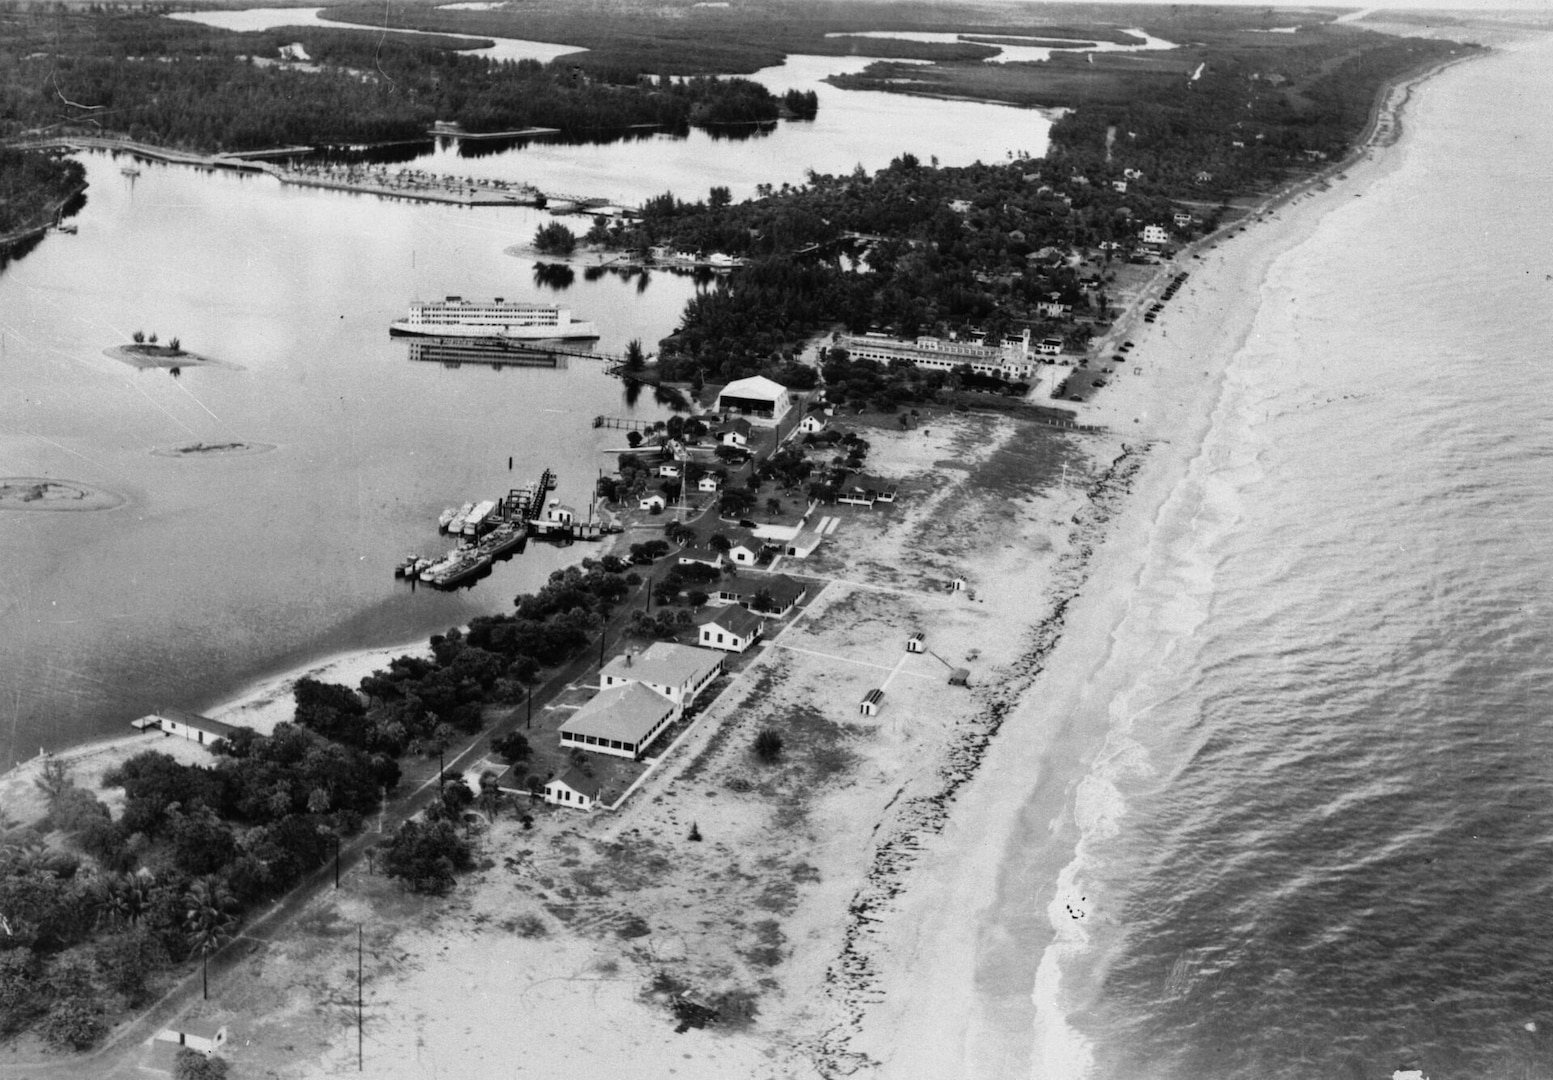 Aerial view of Coast Guard Base Six during its Prohibition enforcement days, showing its small aviation hangar and rafted patrol boats. (Courtesy of the Fort Lauderdale Historical Society)